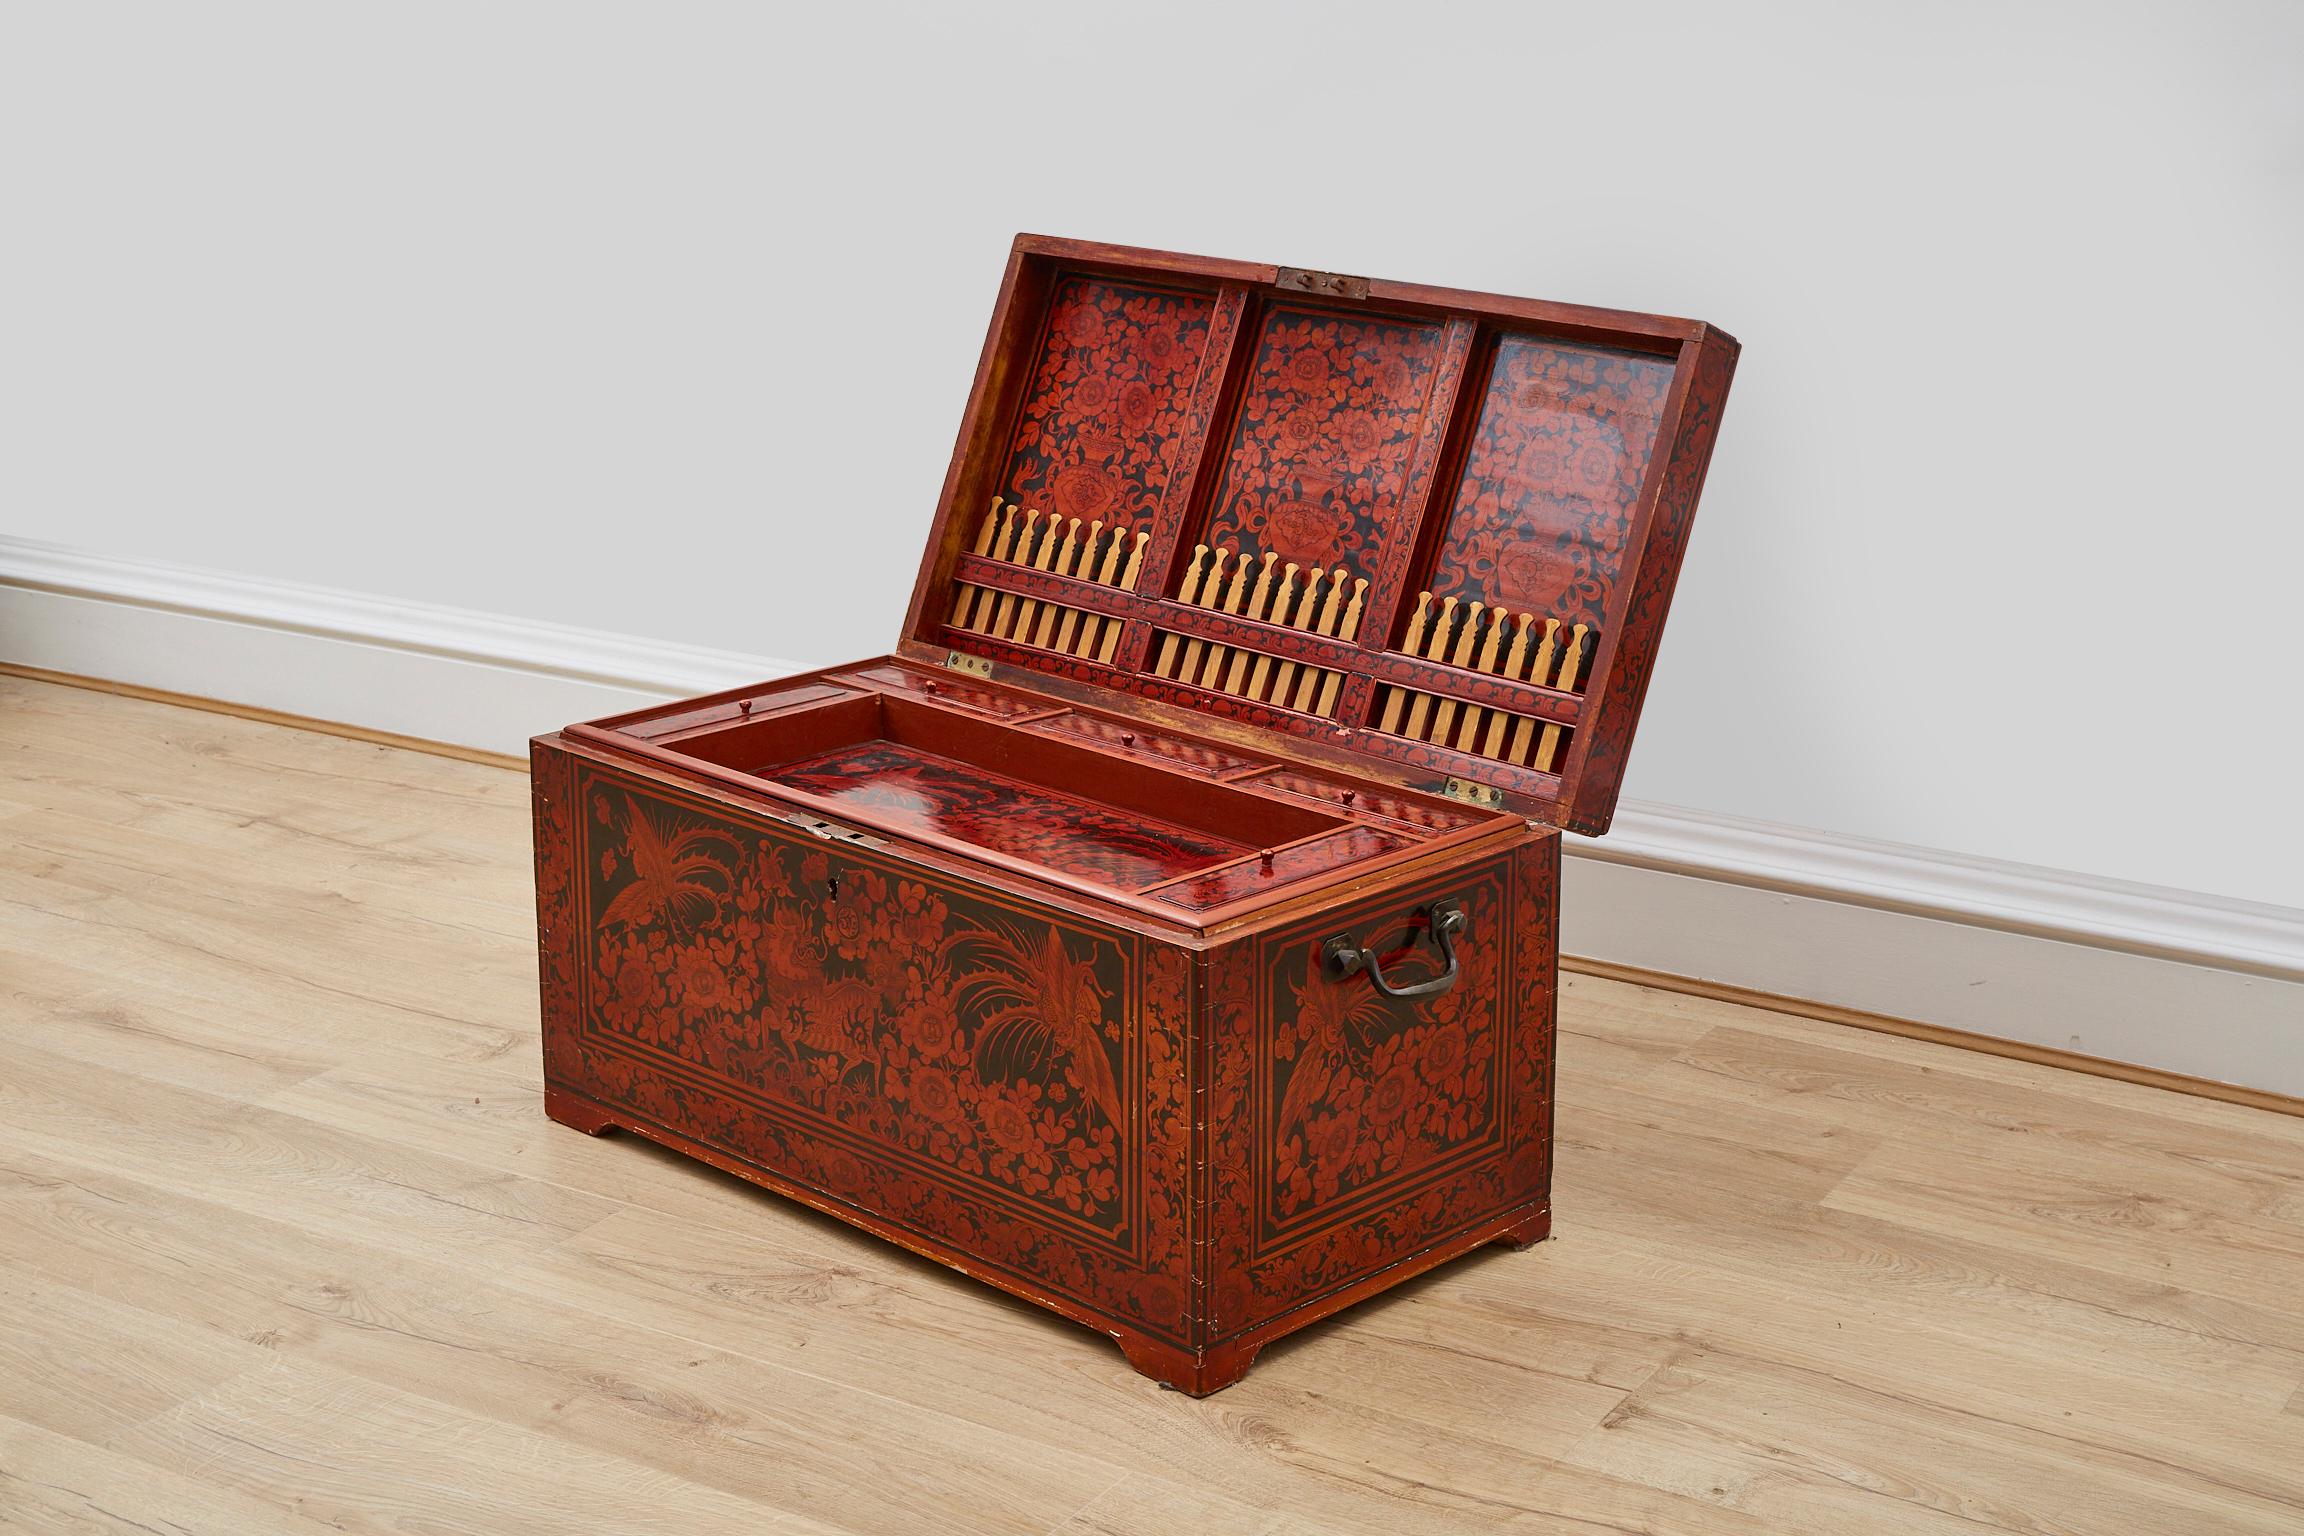 20th Century Red Lacquered Painted Chinese Trunk with Compartments and Counters Early 20th C.